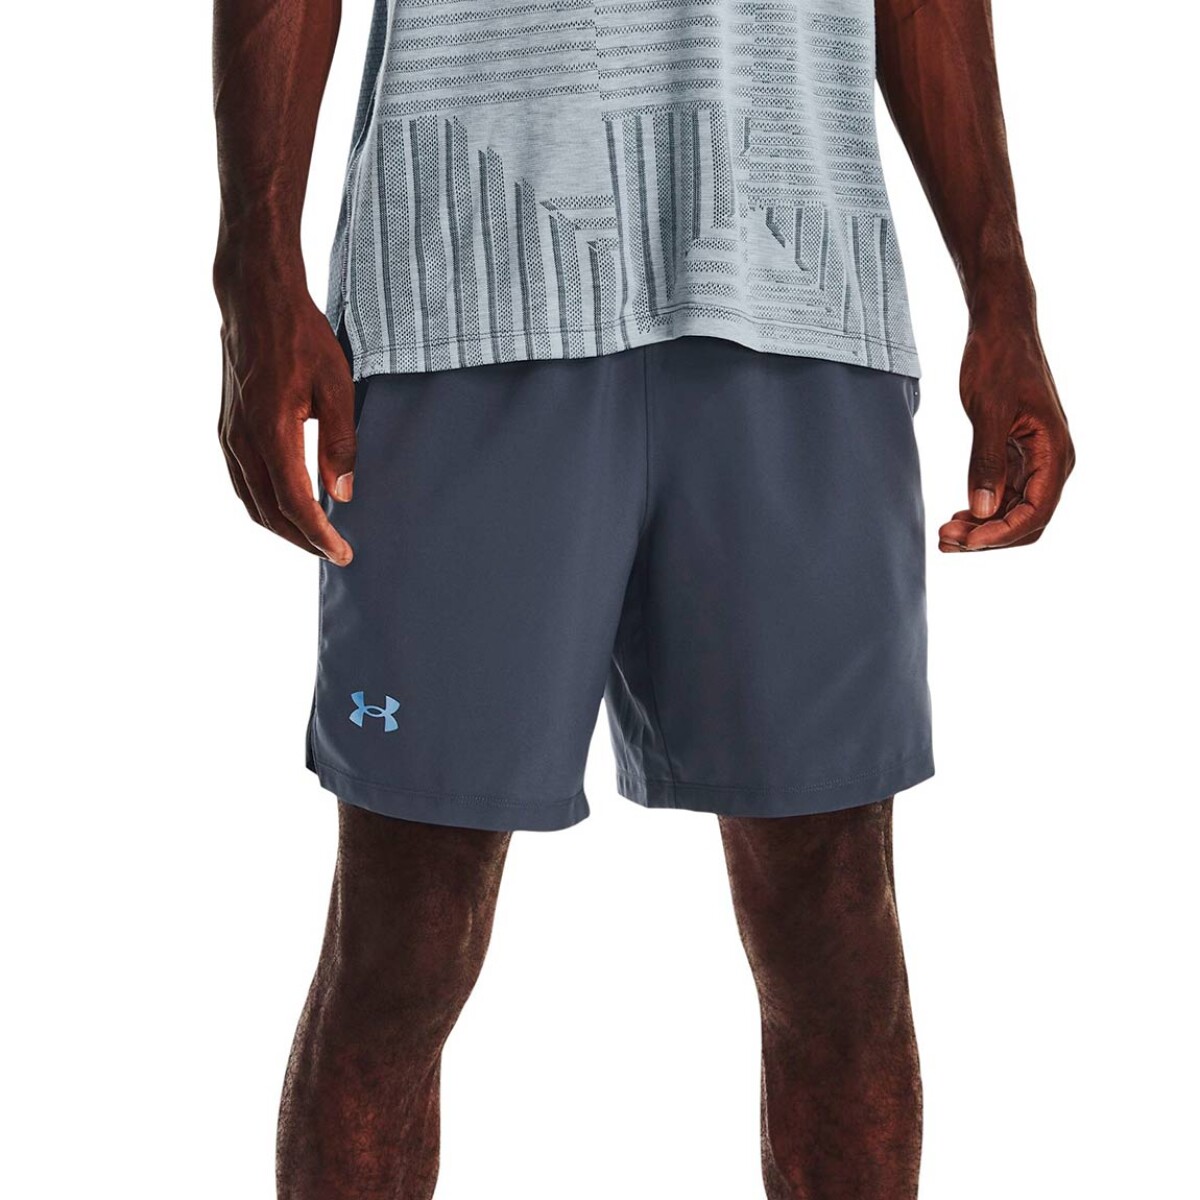 Under Armour Launch 7'' 2-in-1 Short - Gris-negro 